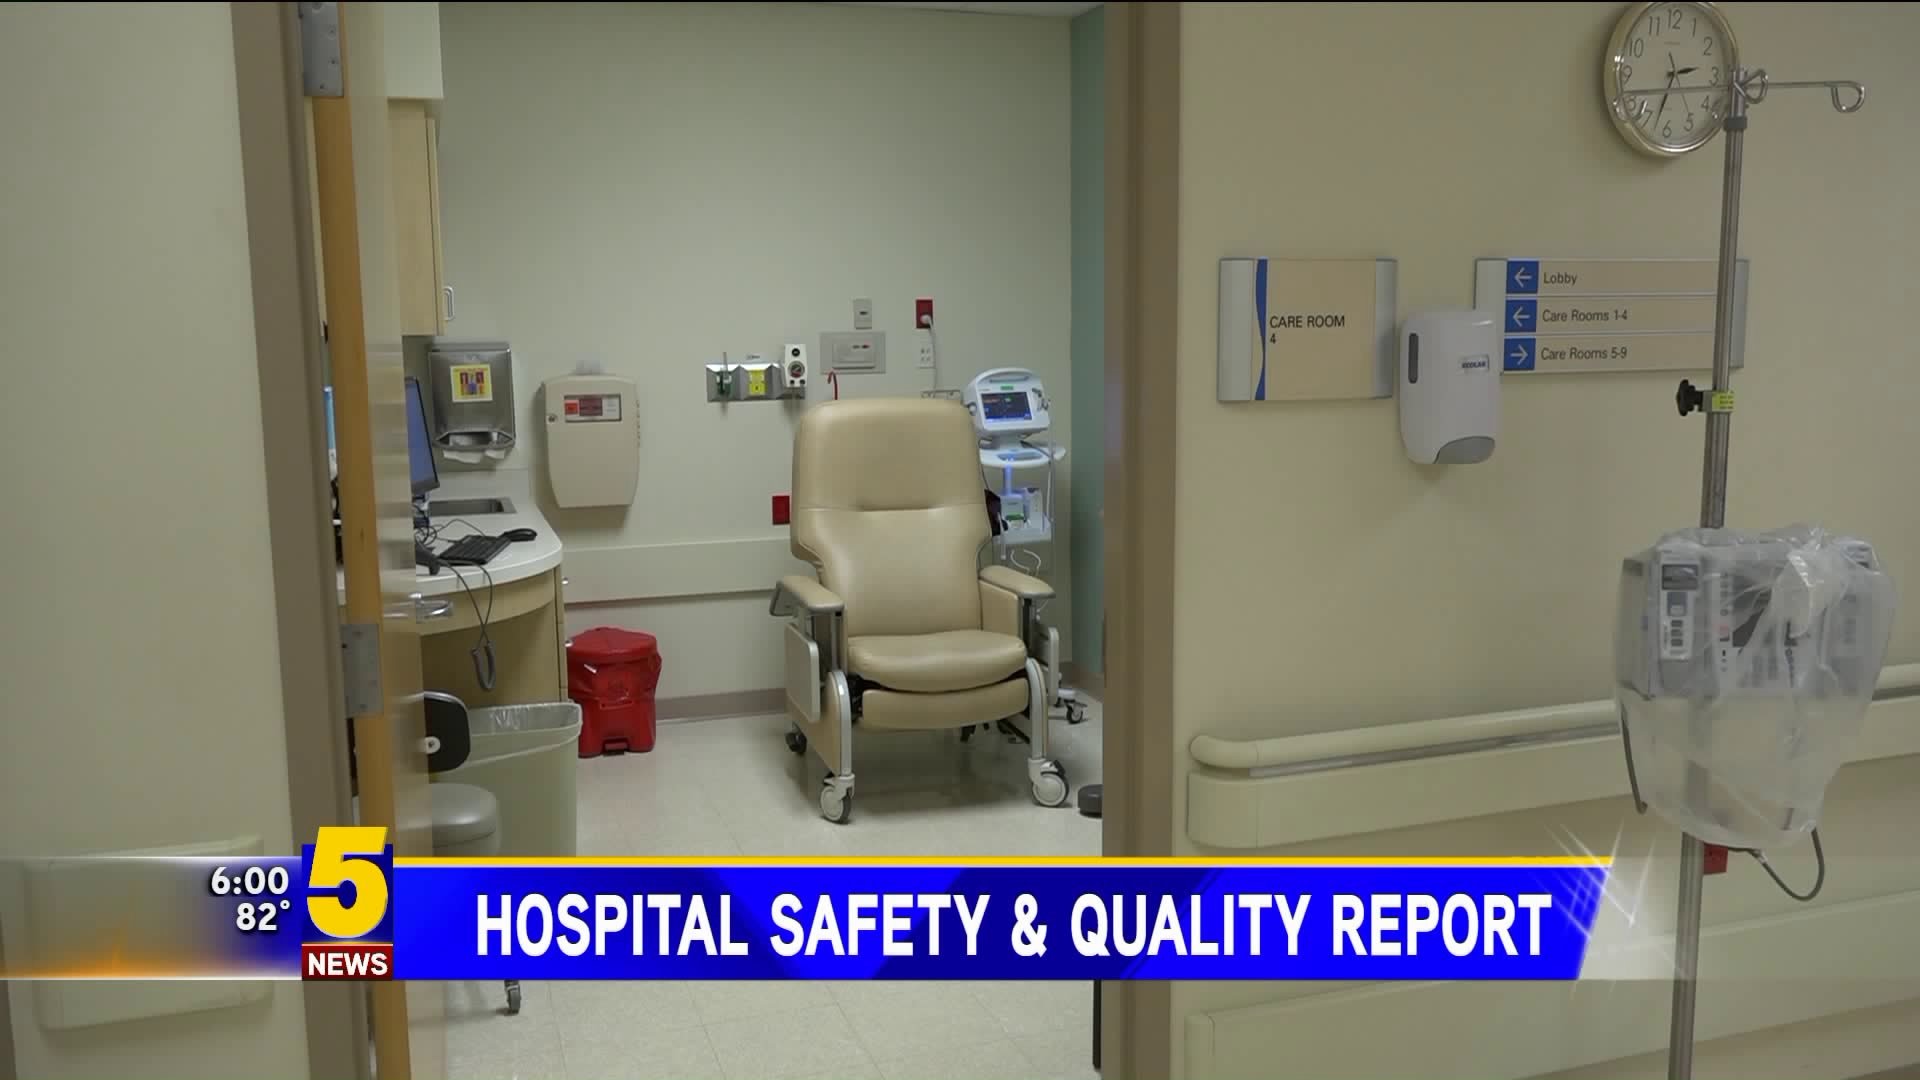 Hosptial Safety & Quality Report